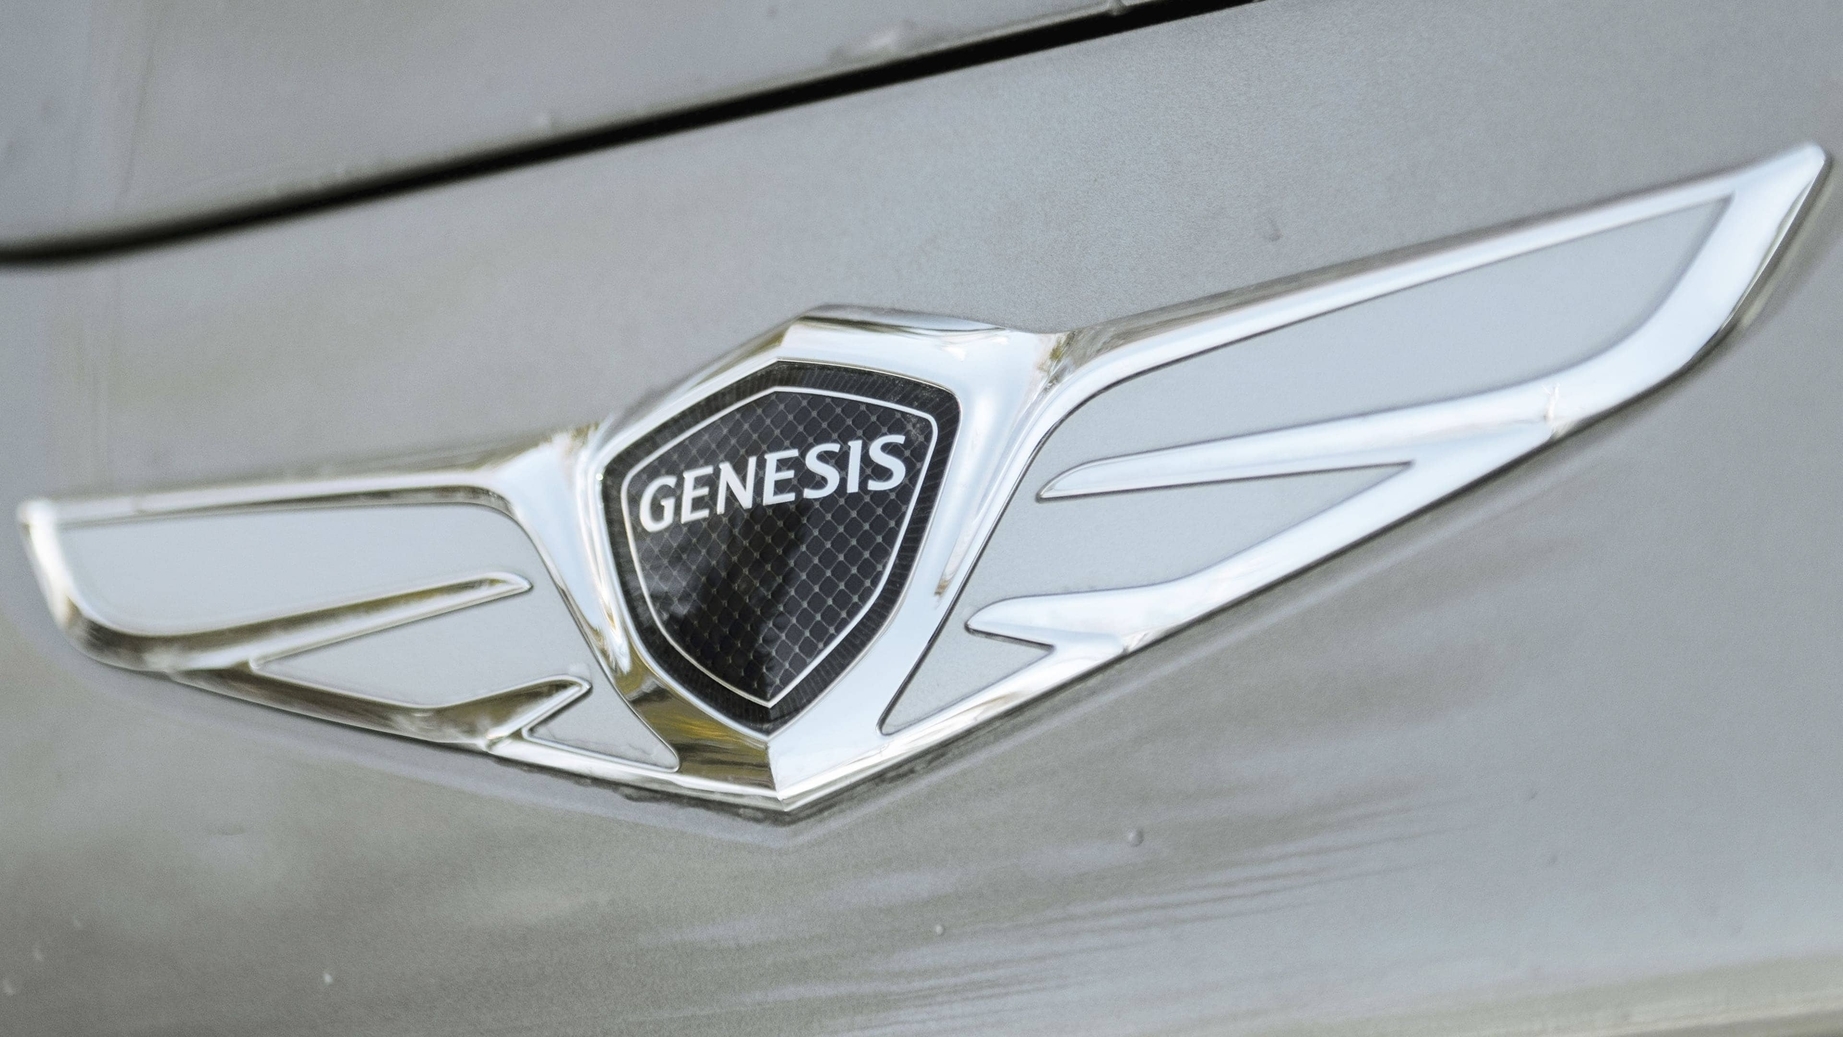 Genesis sign with wings